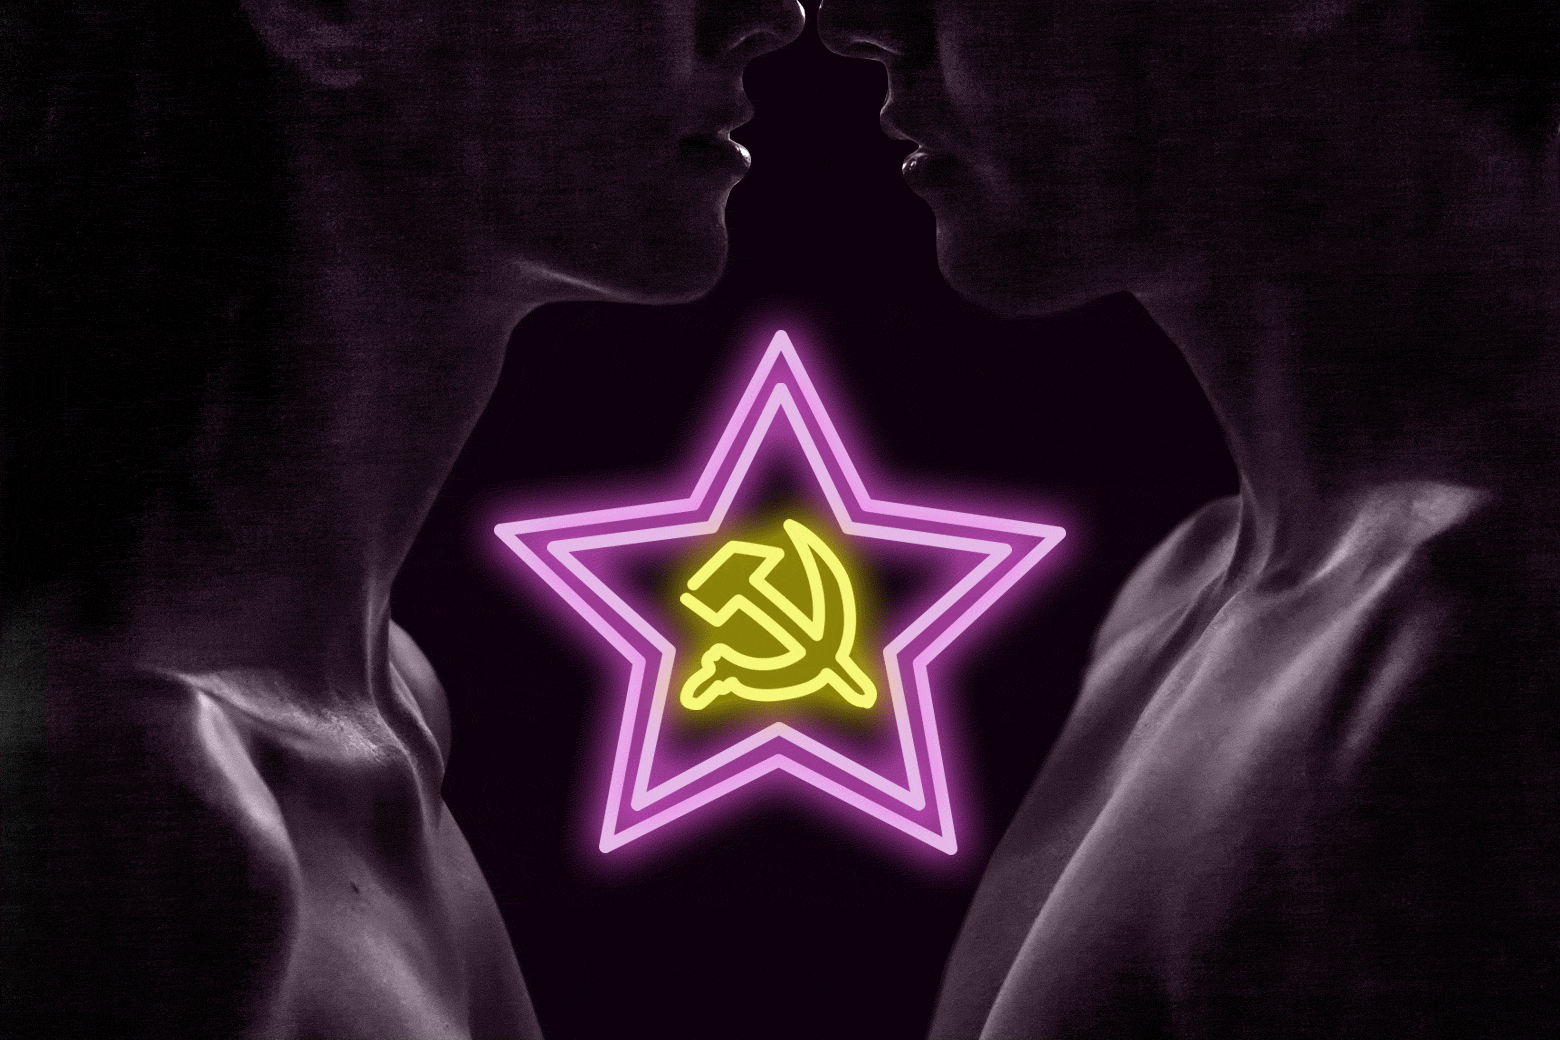 A woman and man embrace in front of a KGB symbol.